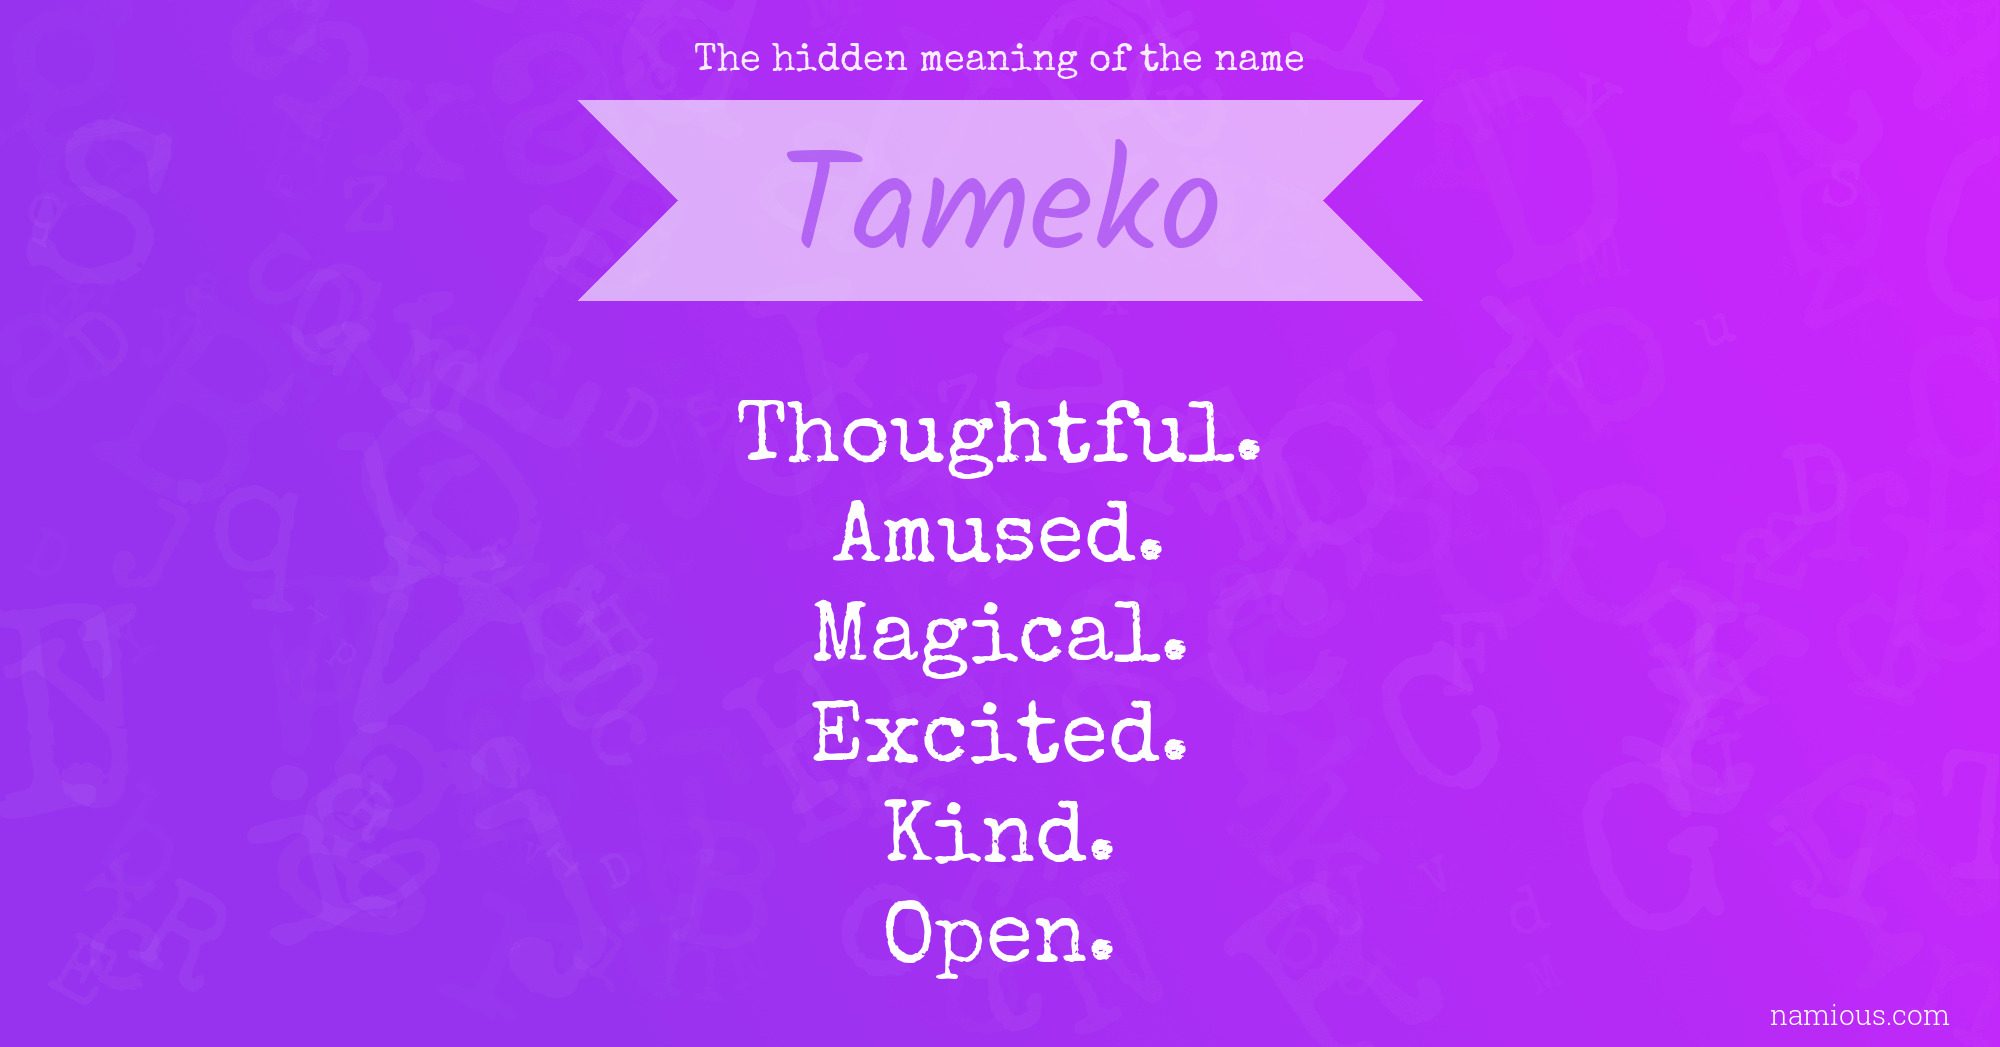 The hidden meaning of the name Tameko